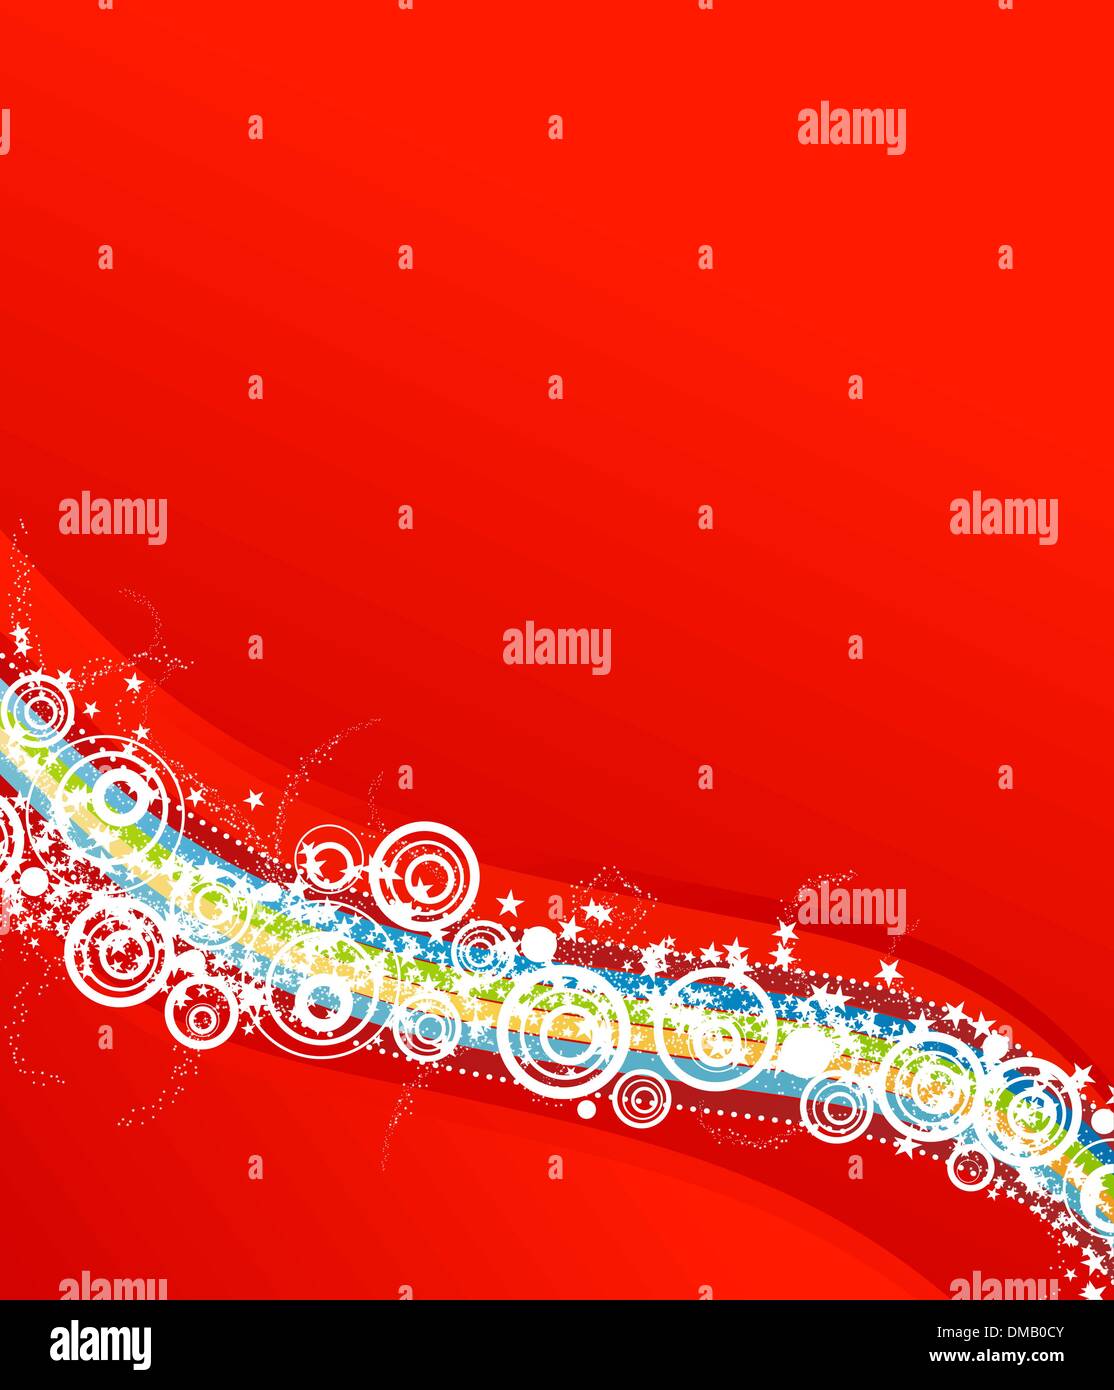 Celebration background with millions of stars Stock Vector